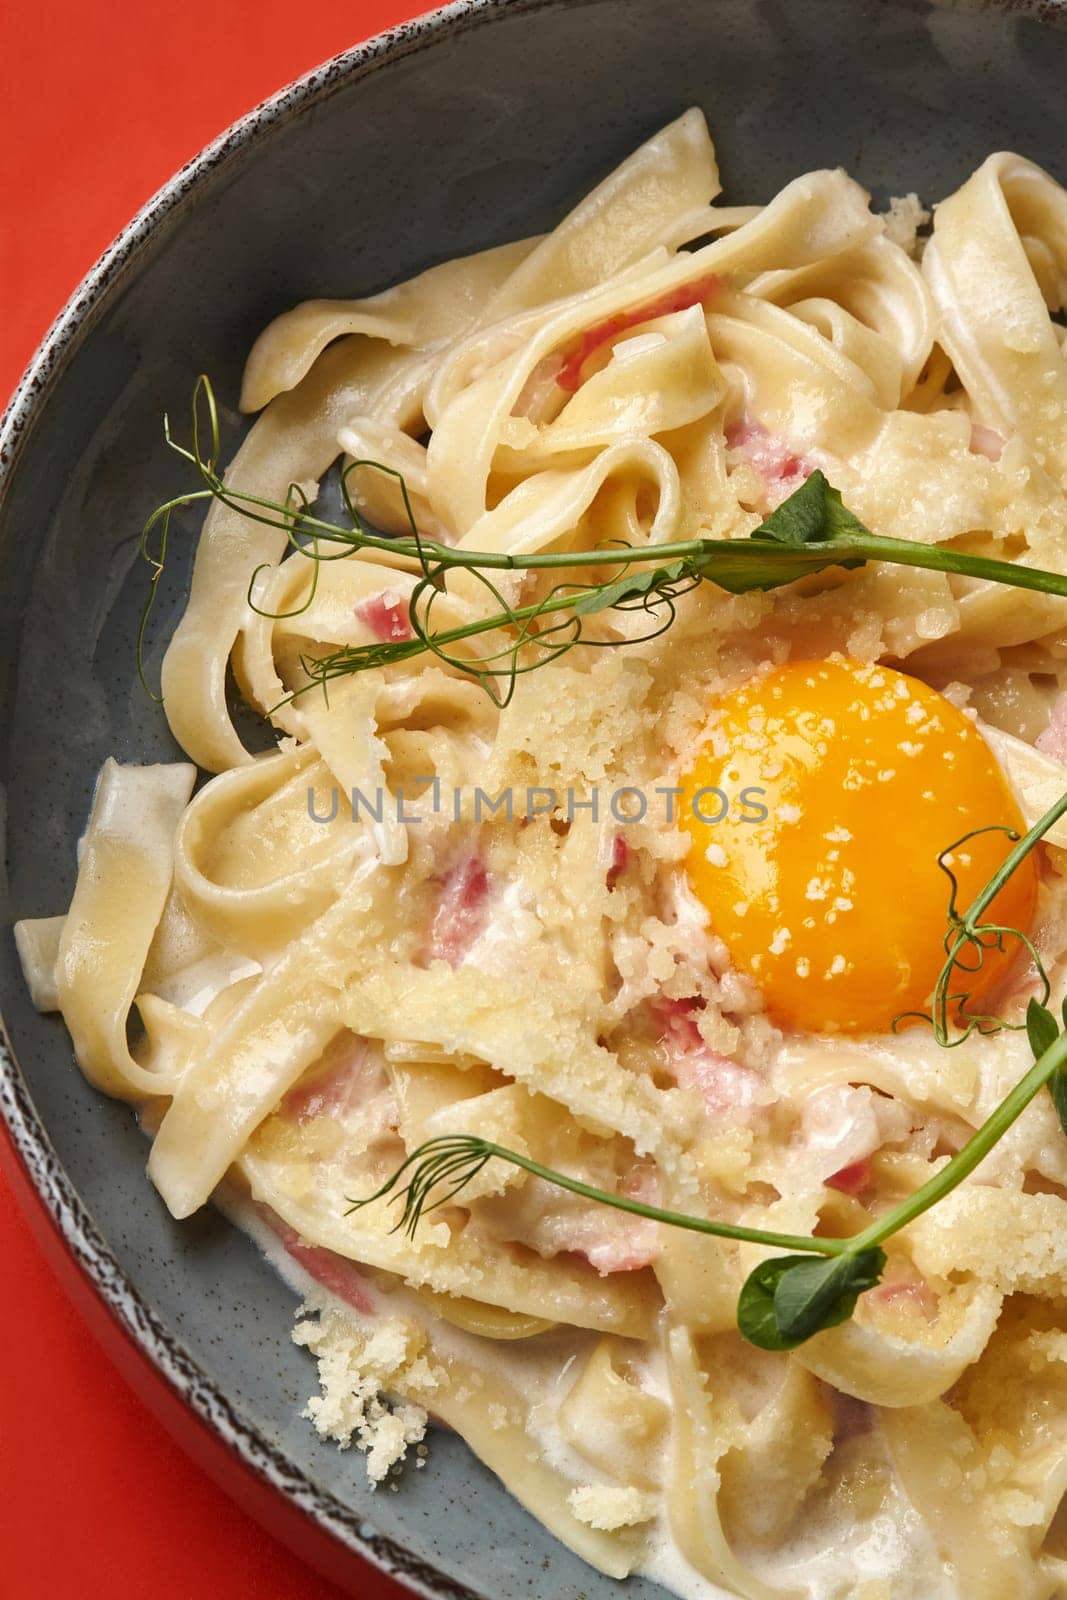 Traditional Italian pasta carbonara with sunny-side up egg and parmesan by nazarovsergey